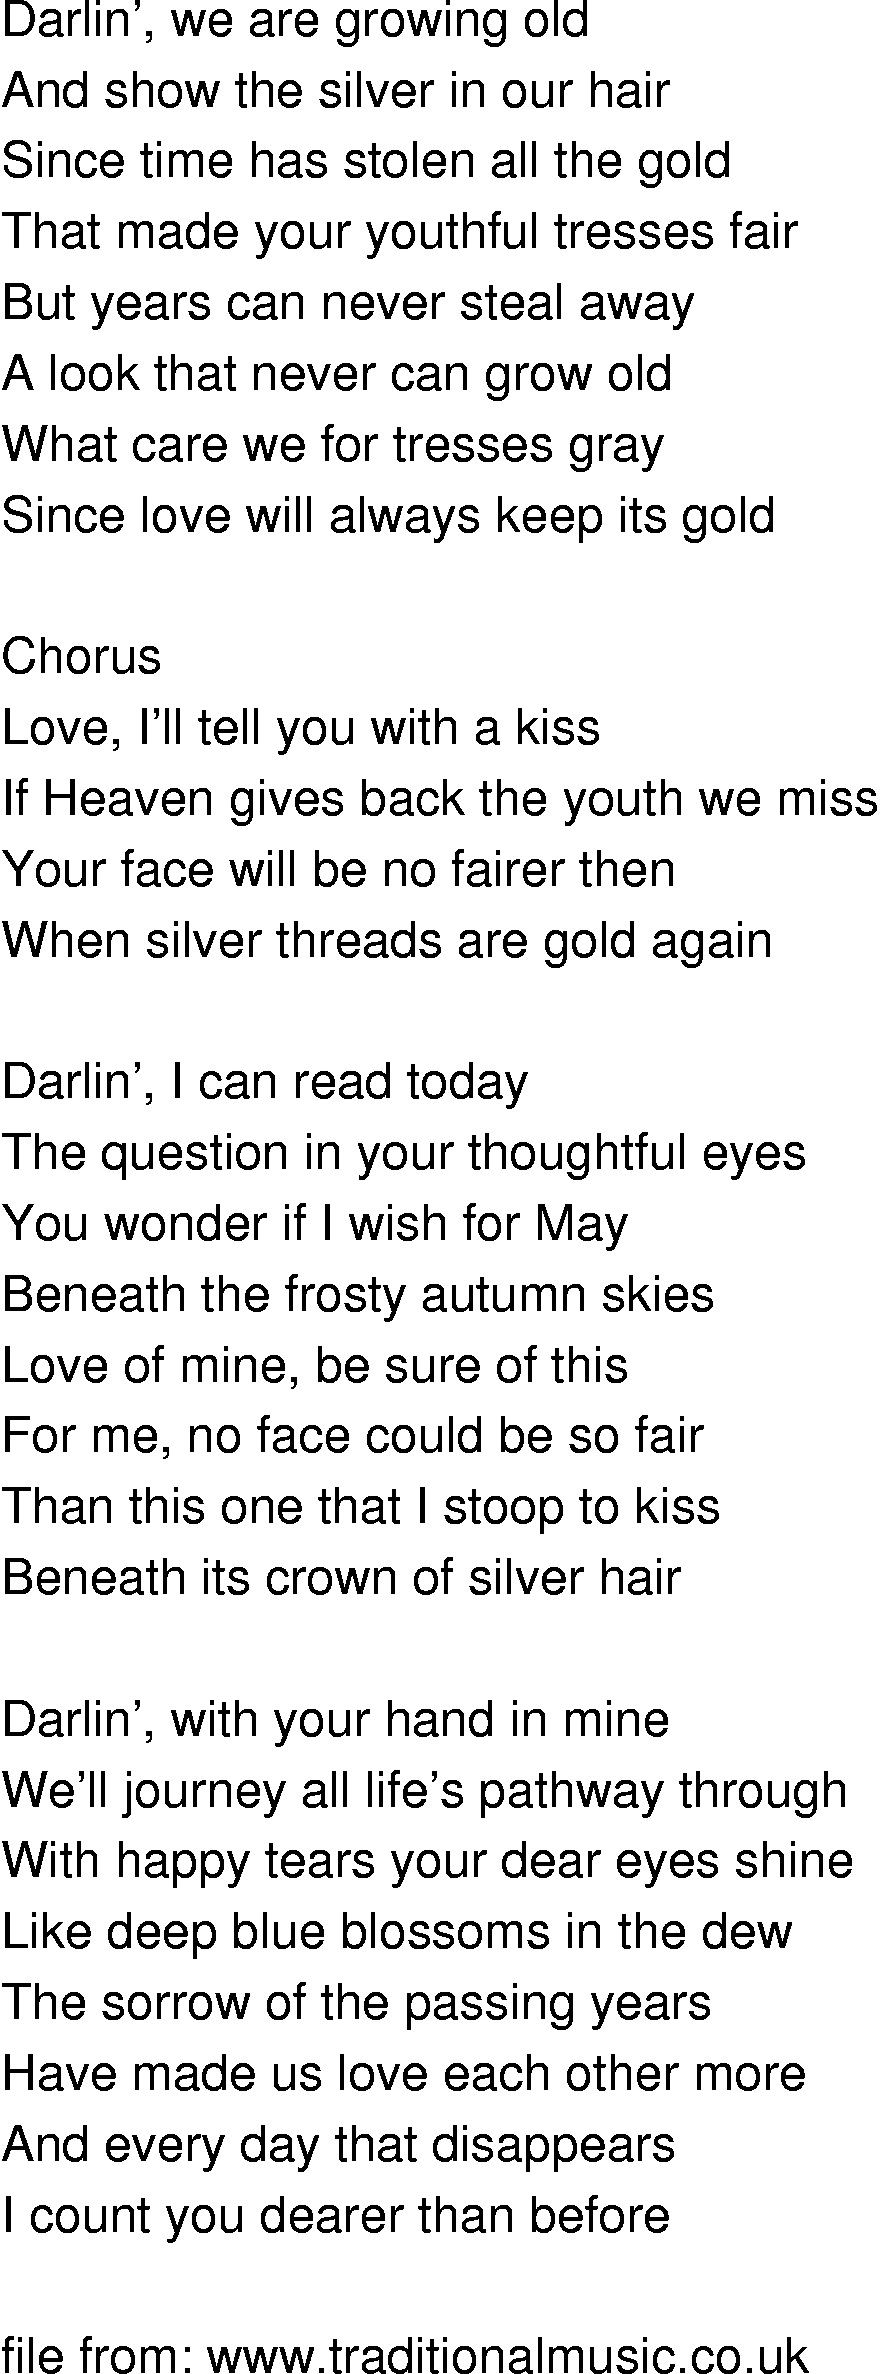 Old-Time (oldtimey) Song Lyrics - when silver threads are gold again